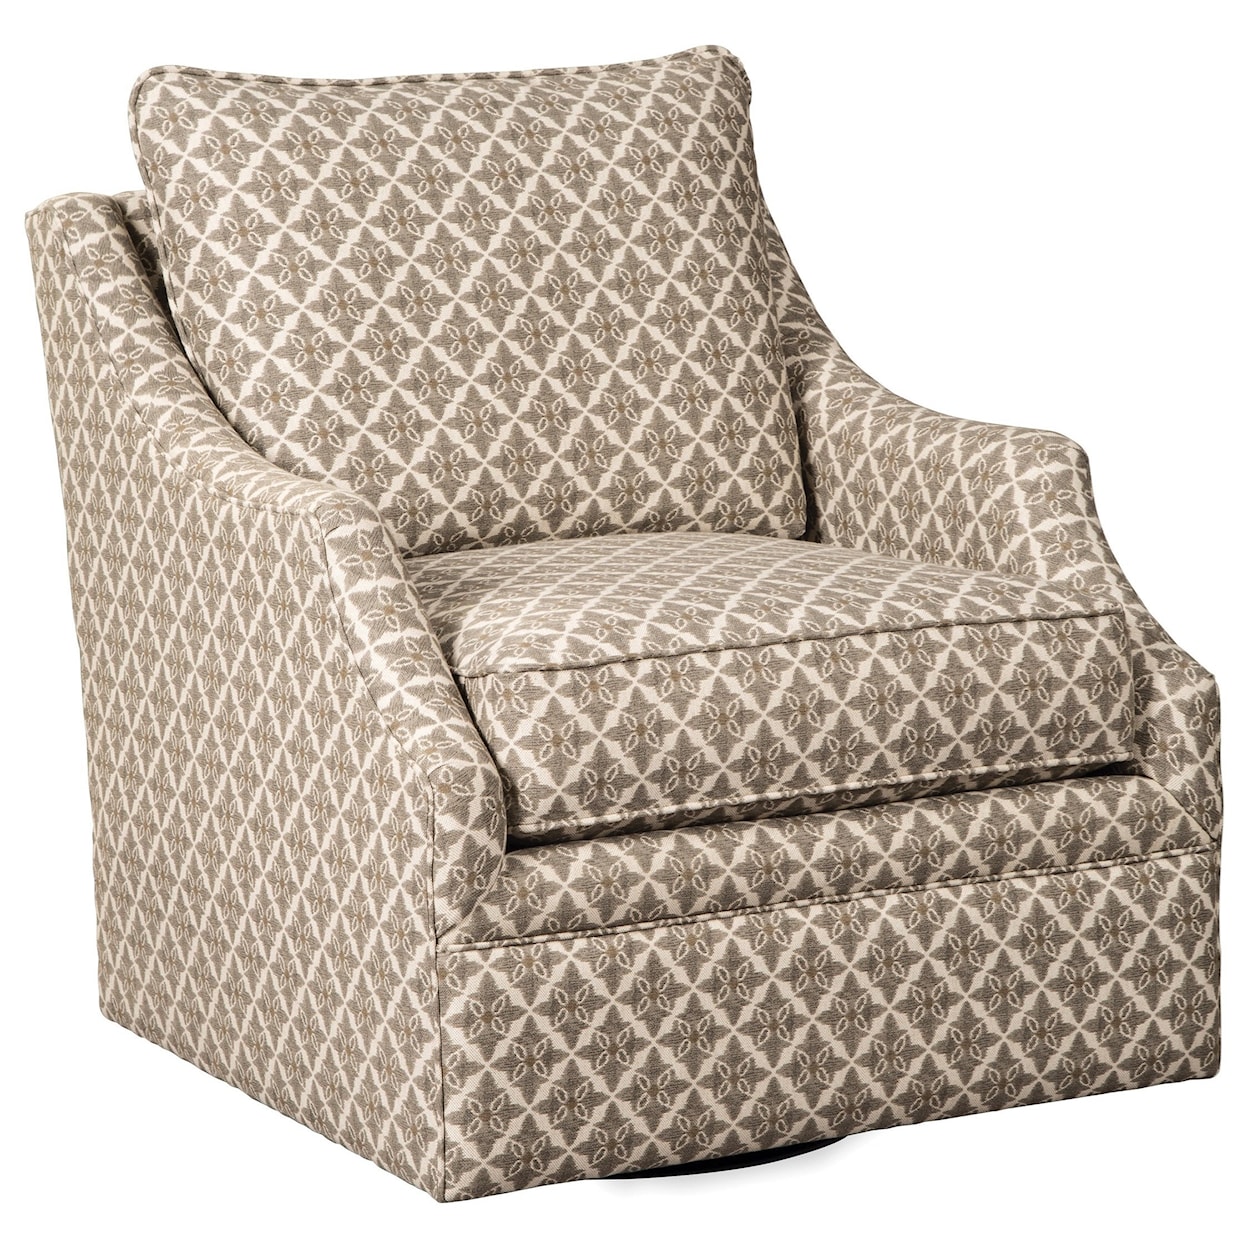 Hickory Craft Upholstered Chairs Glider Chair